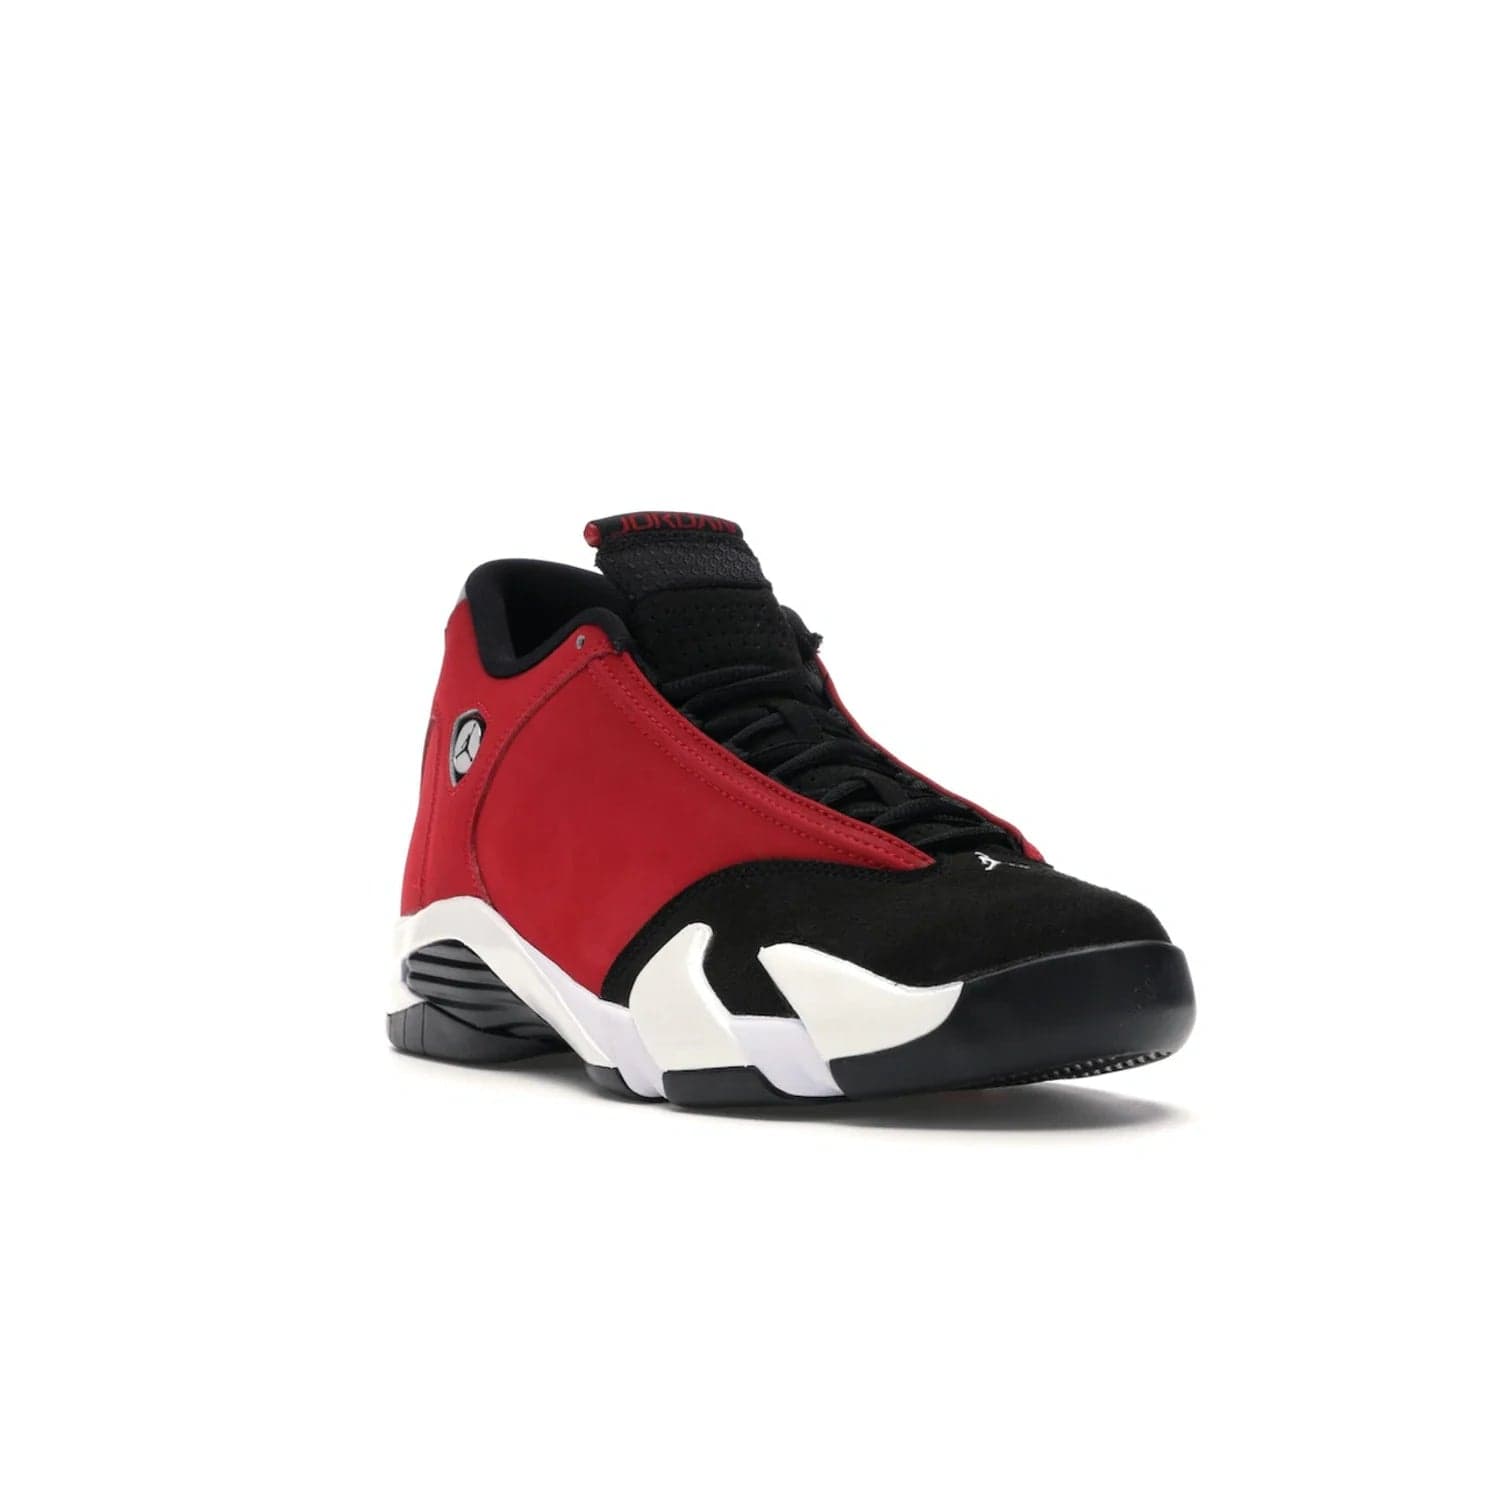 Jordan 14 Retro Gym Red Toro - Image 6 - Only at www.BallersClubKickz.com - Feel the Chicago Bulls energy with the Jordan 14 Retro Gym Red Toro! Black, red, and white design unites performance and fashion. Get your hands on this limited edition Jordan and show off your style today.